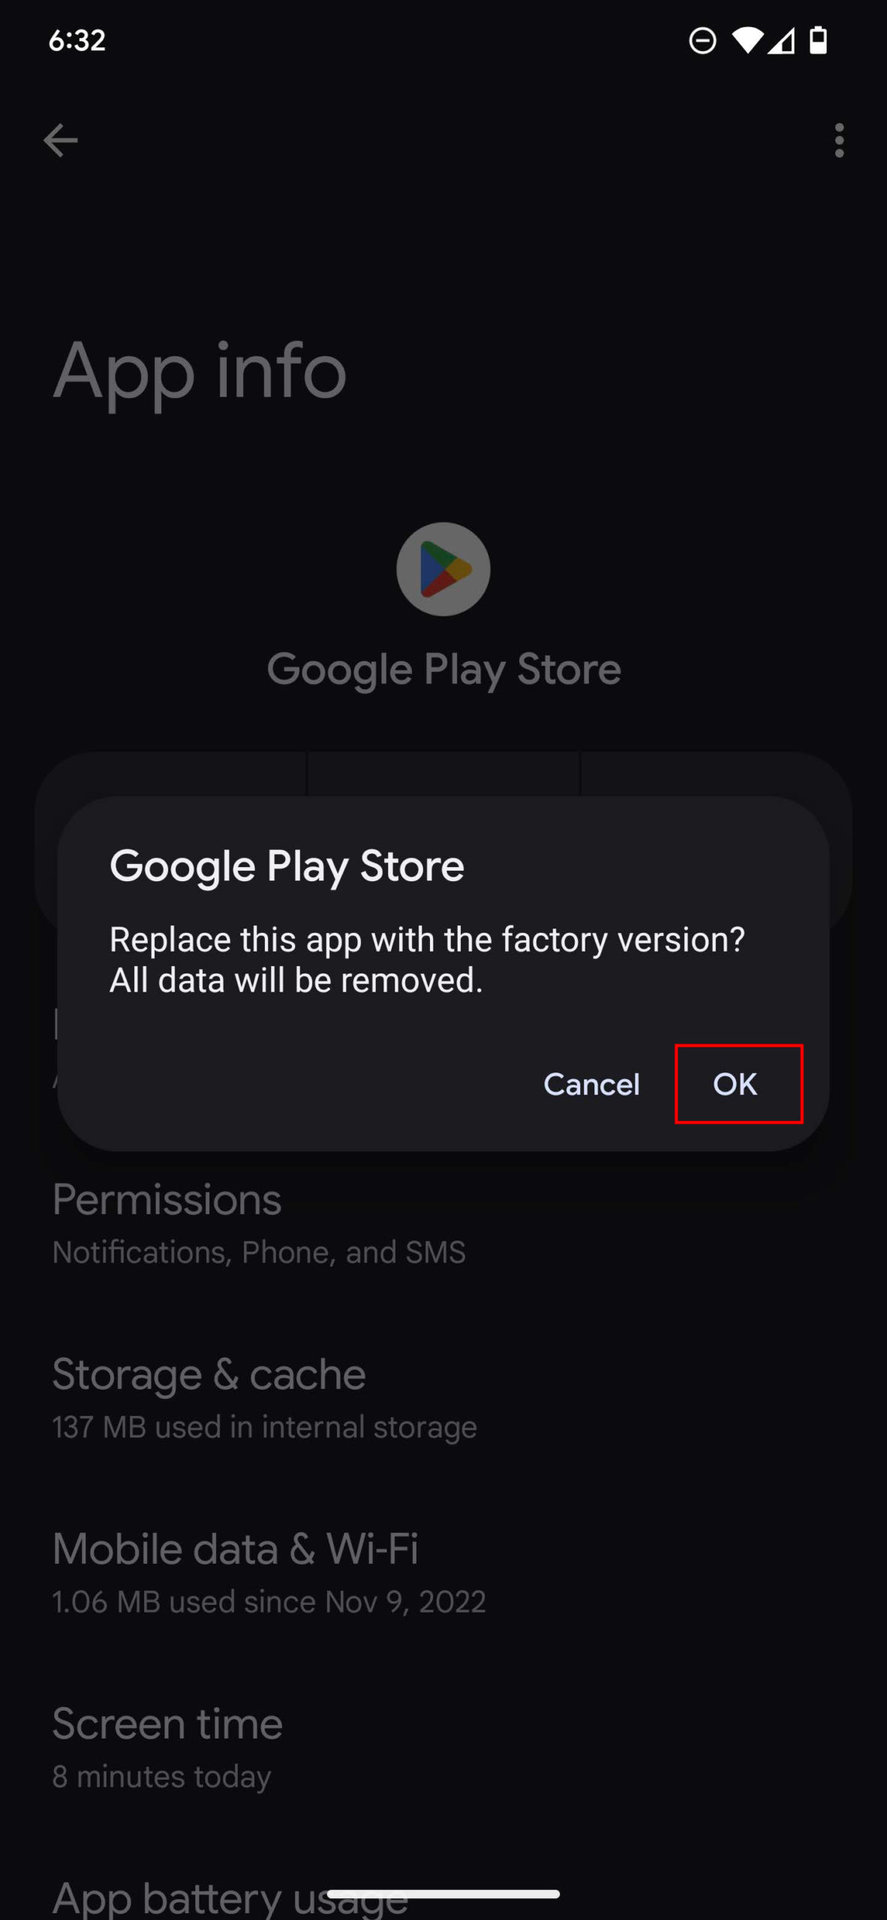 How To Fix Can't Download Roblox Error On Google Play Store Android & Ios  2020 